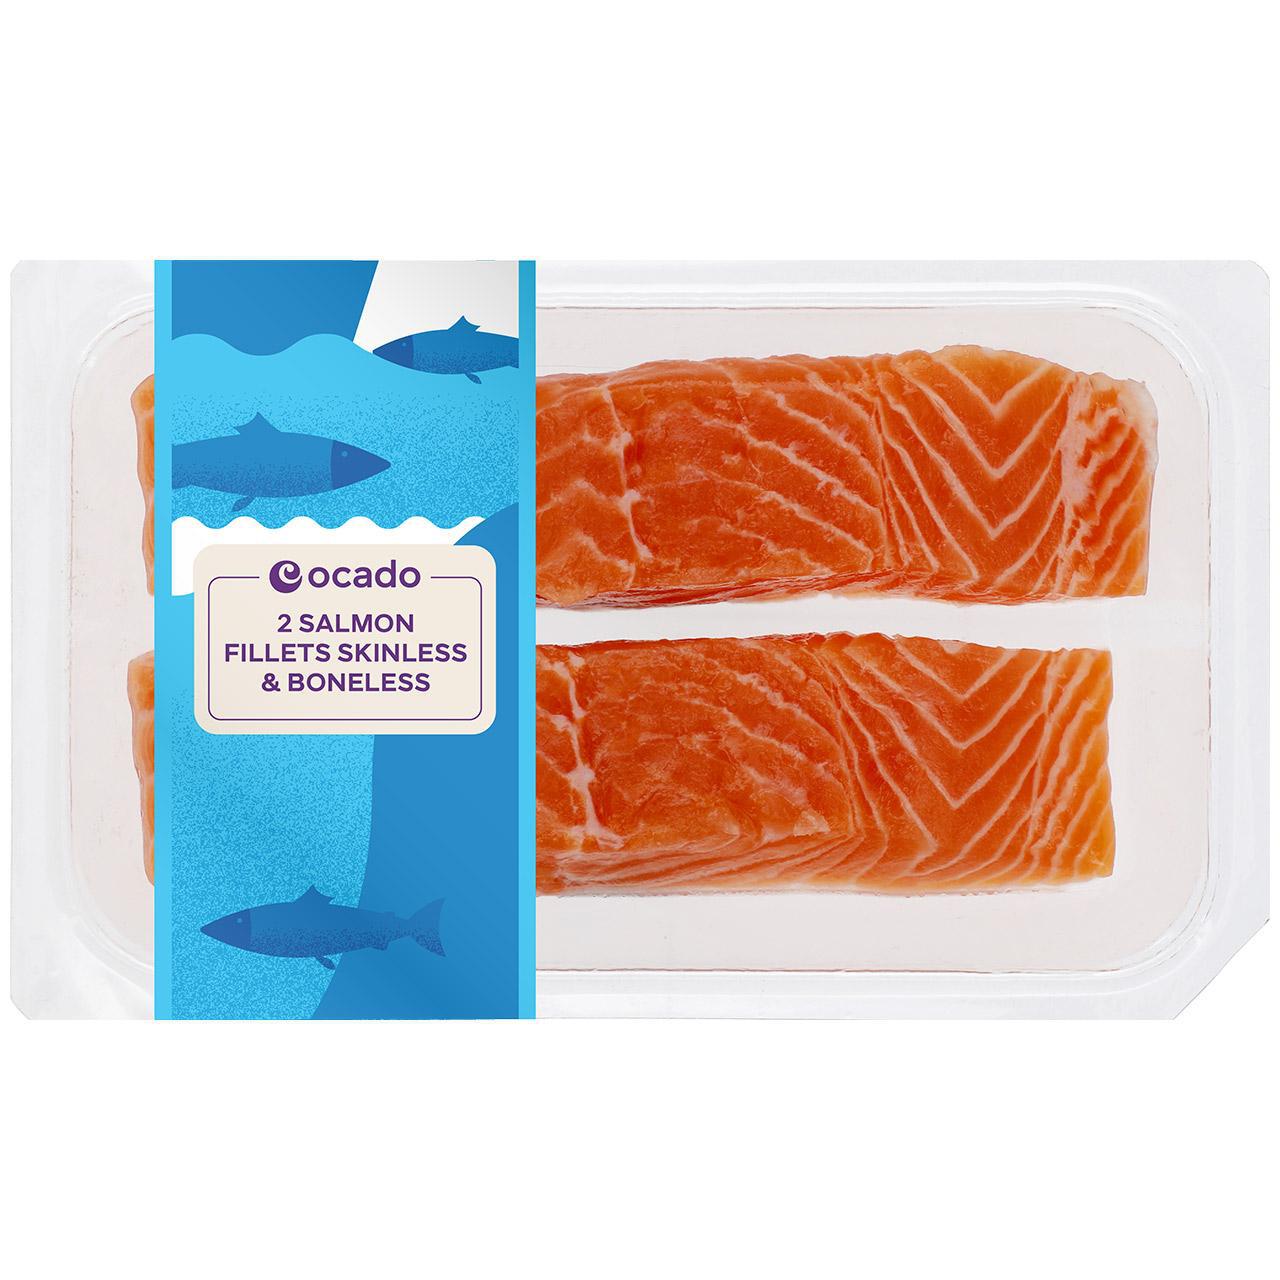 Ocado 2 Salmon Skinless Mid/Tail Fillets 240g